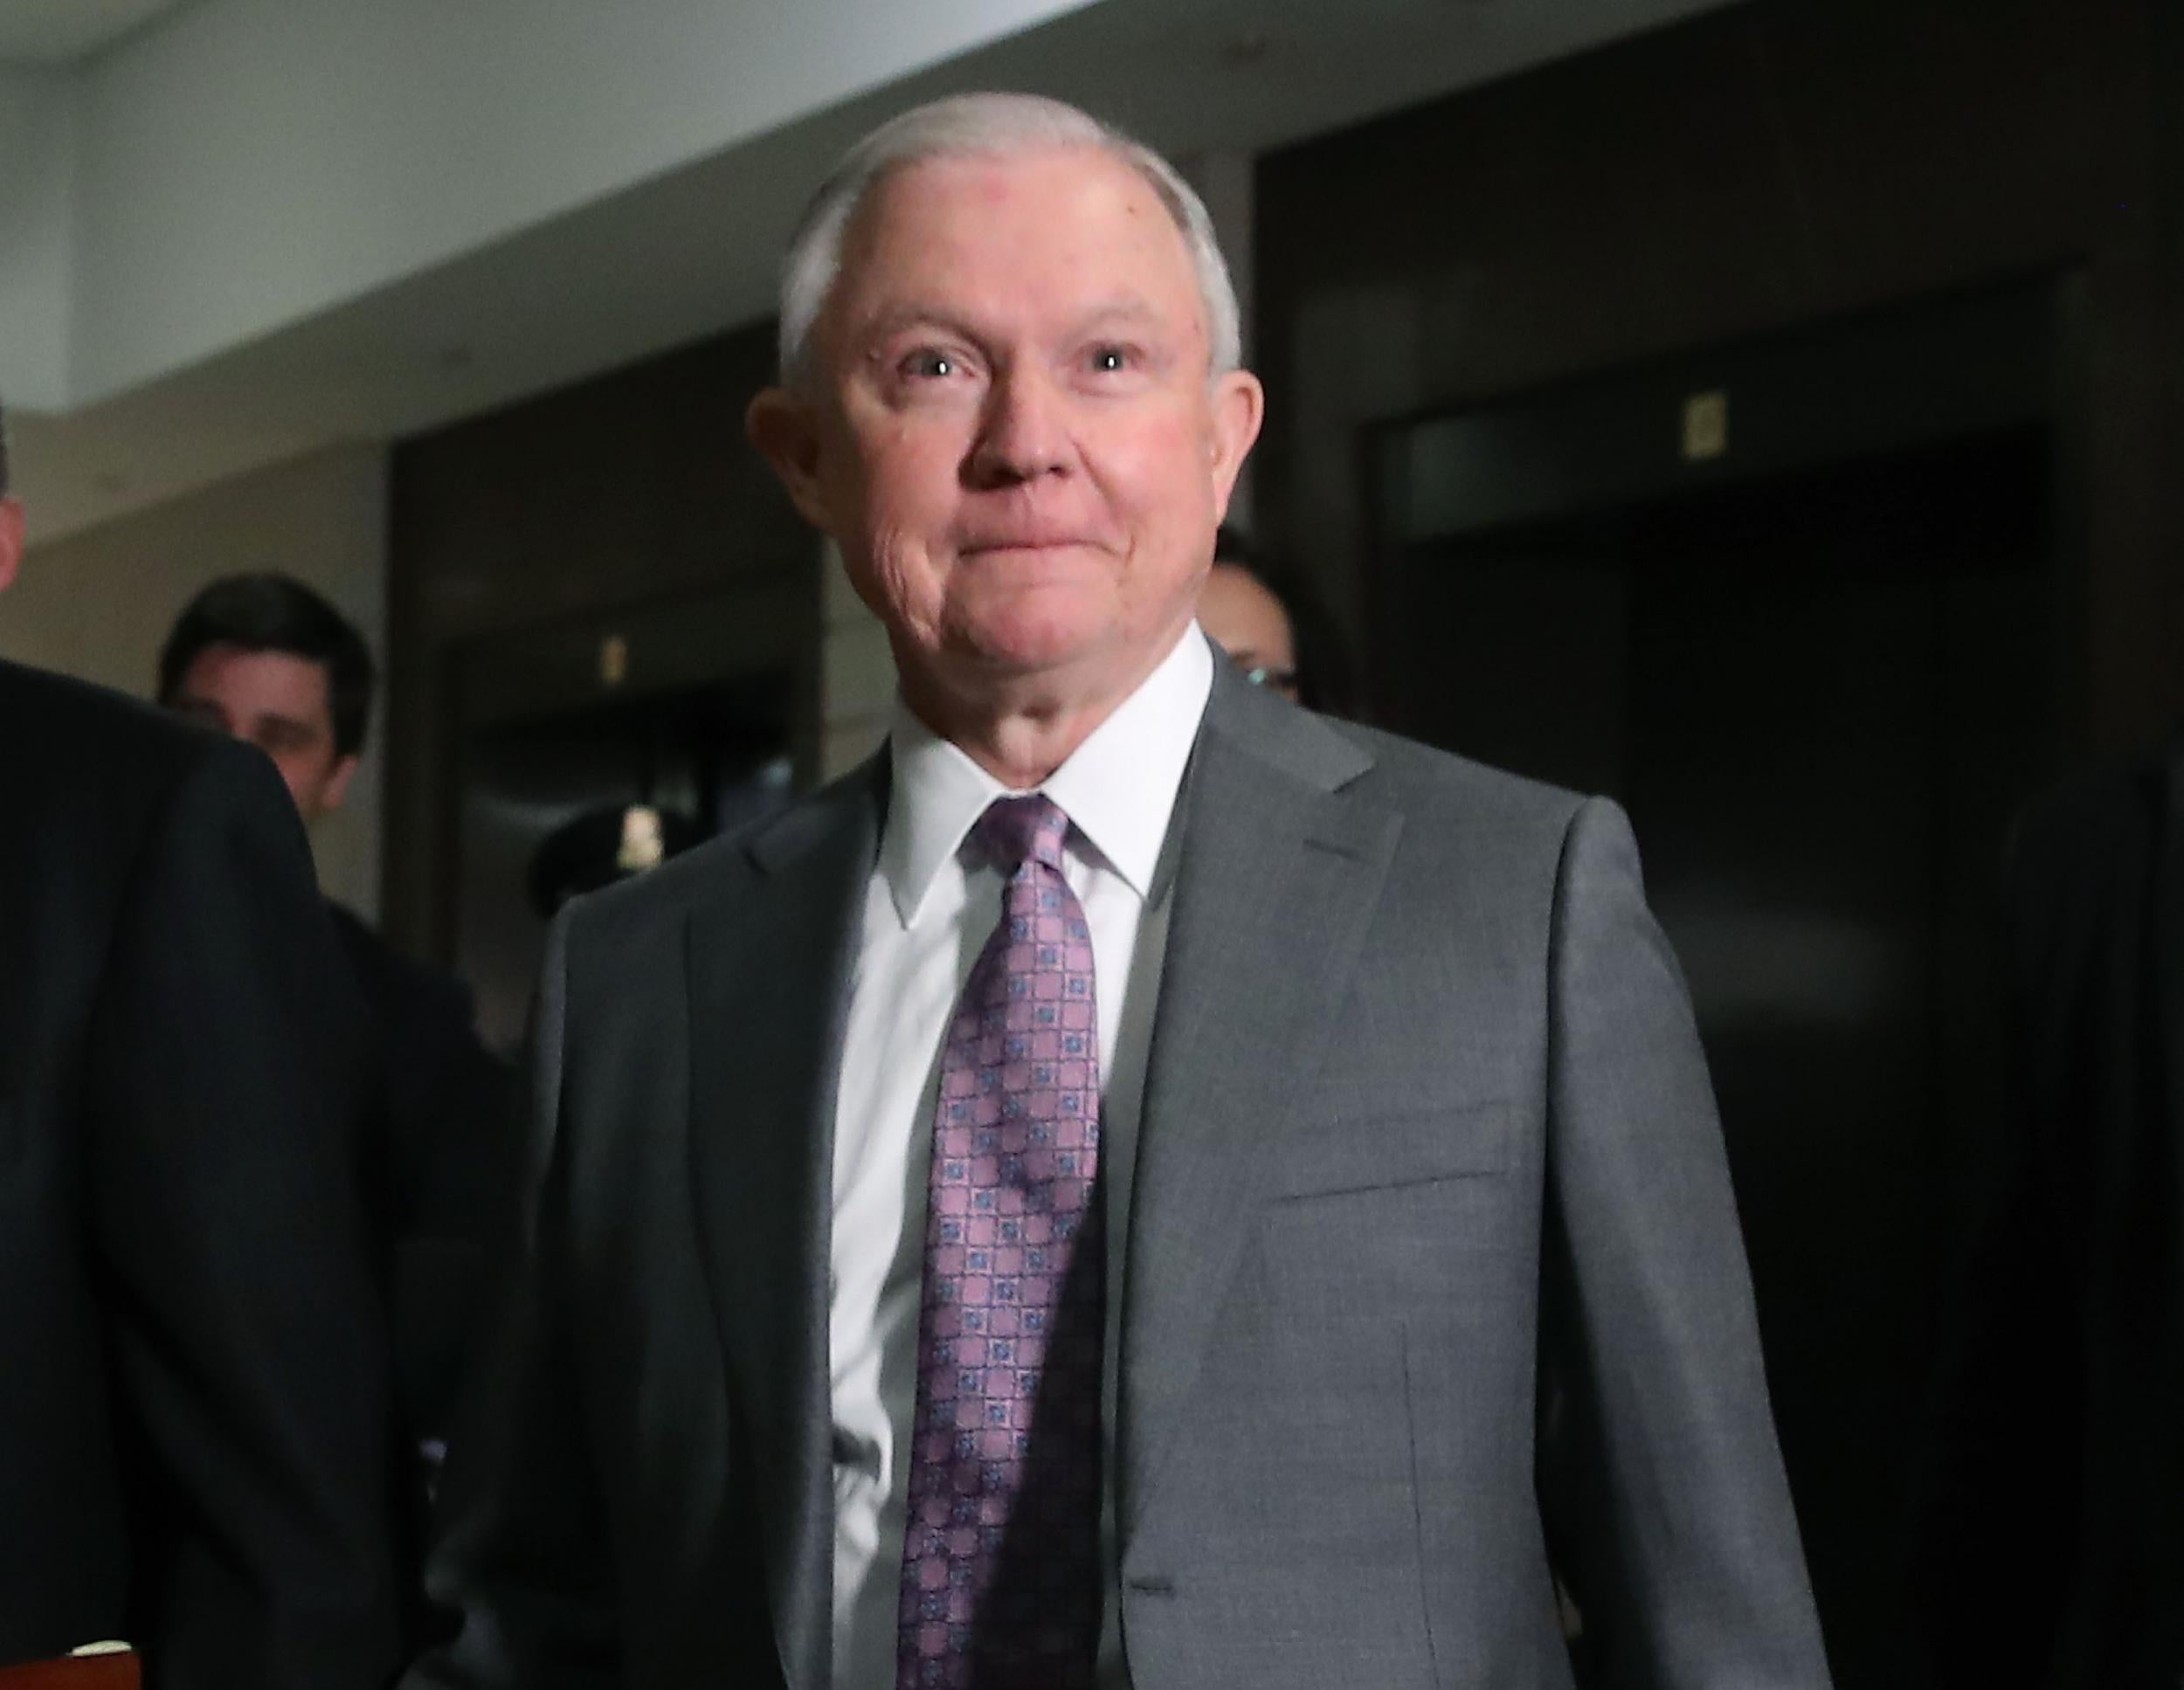 Mr Sessions says he wants to be heavily involved in cutting down on the backlog facing immigration courts